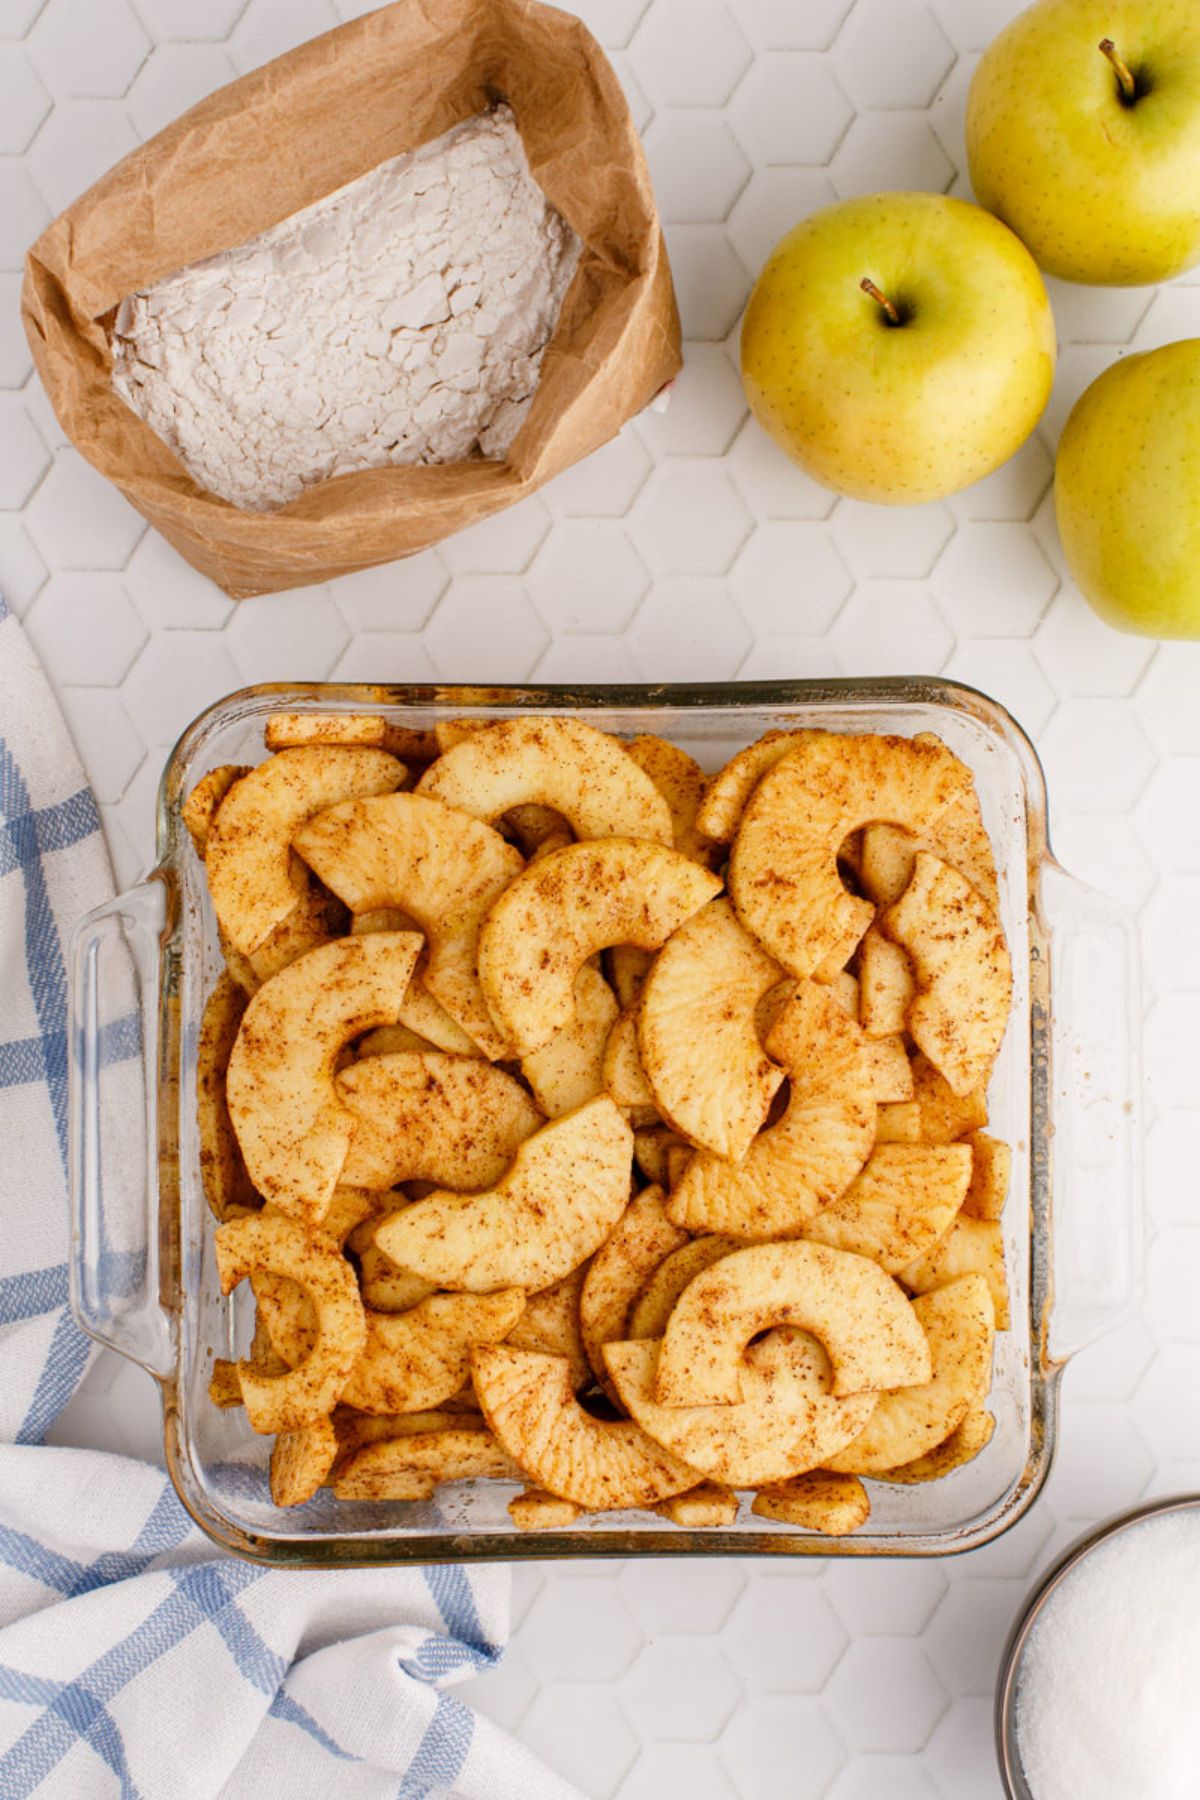 Spiced apples in a baking dish.